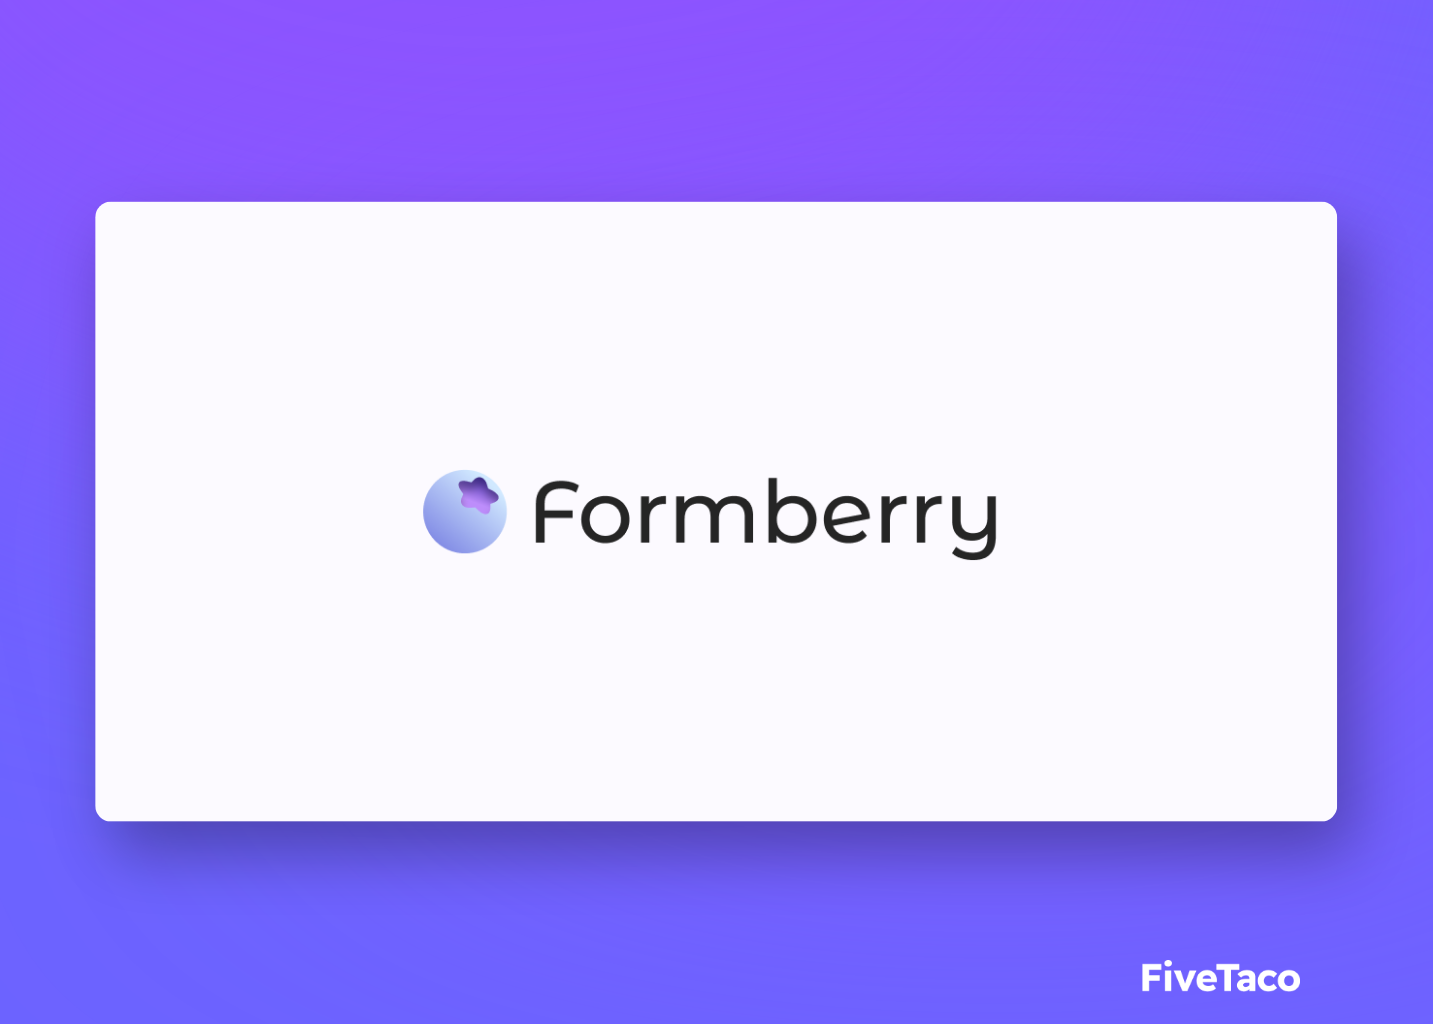 Formberry